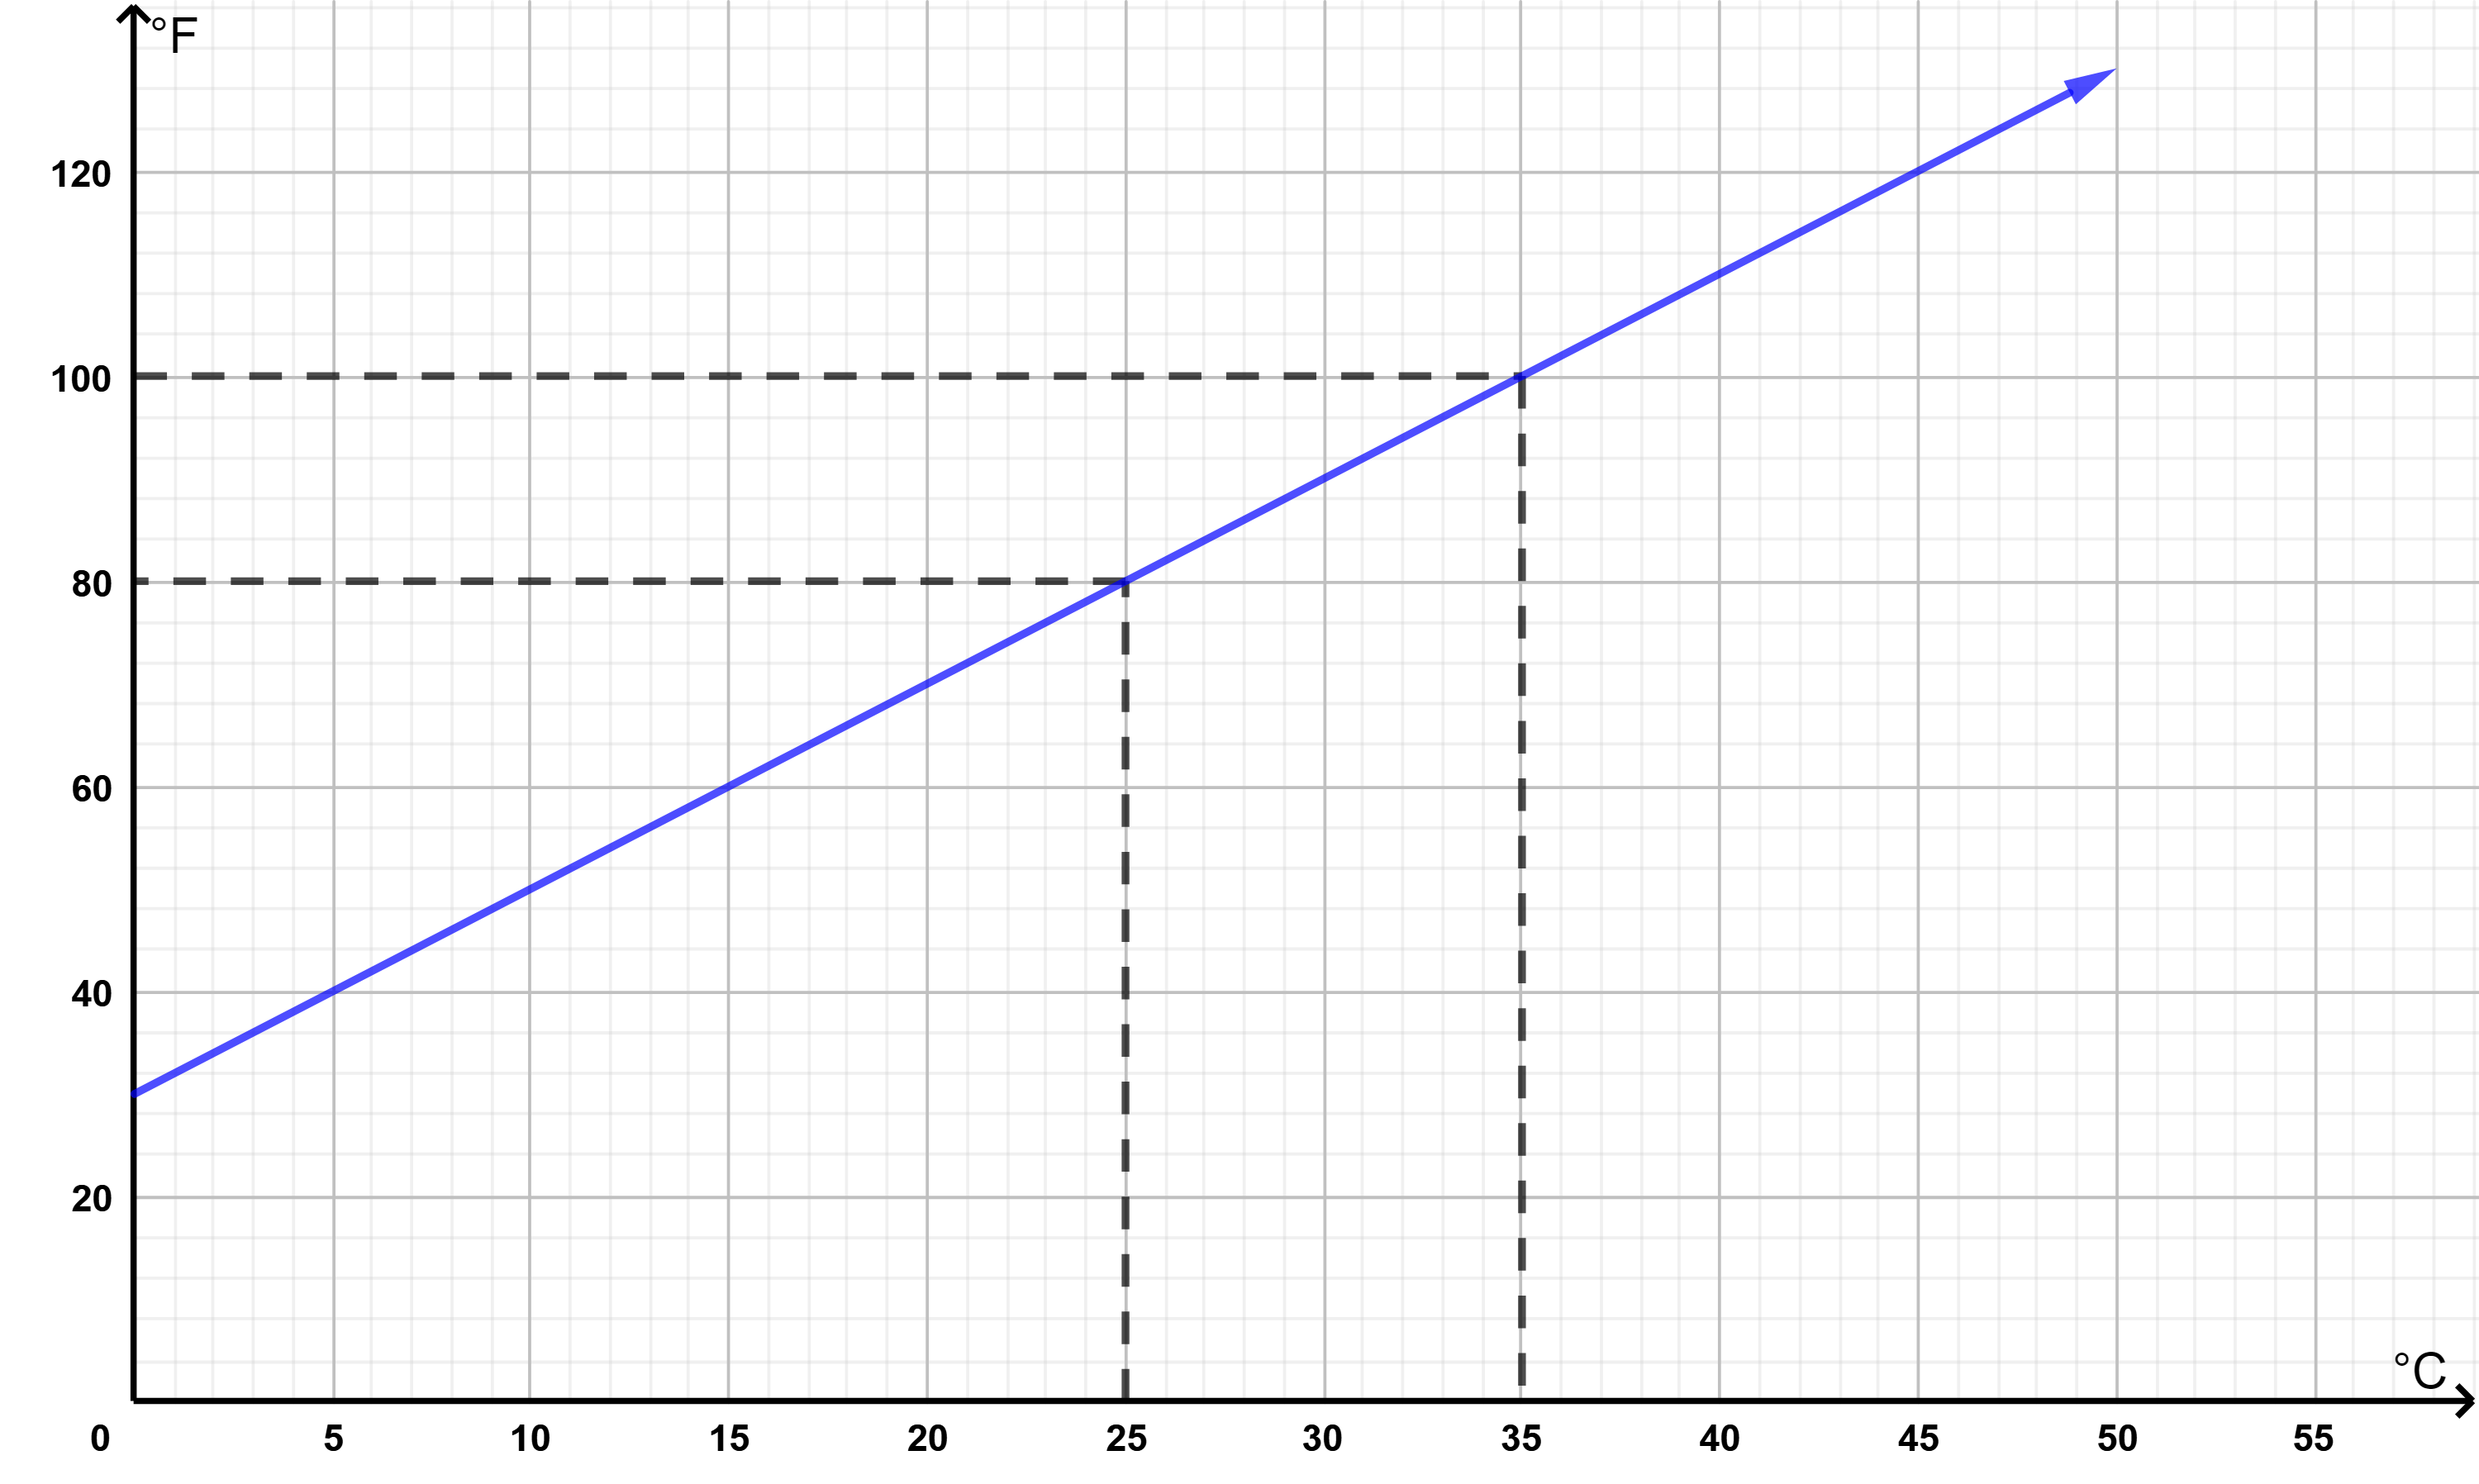 Miguel used the graph below to convert temperatures in degrees